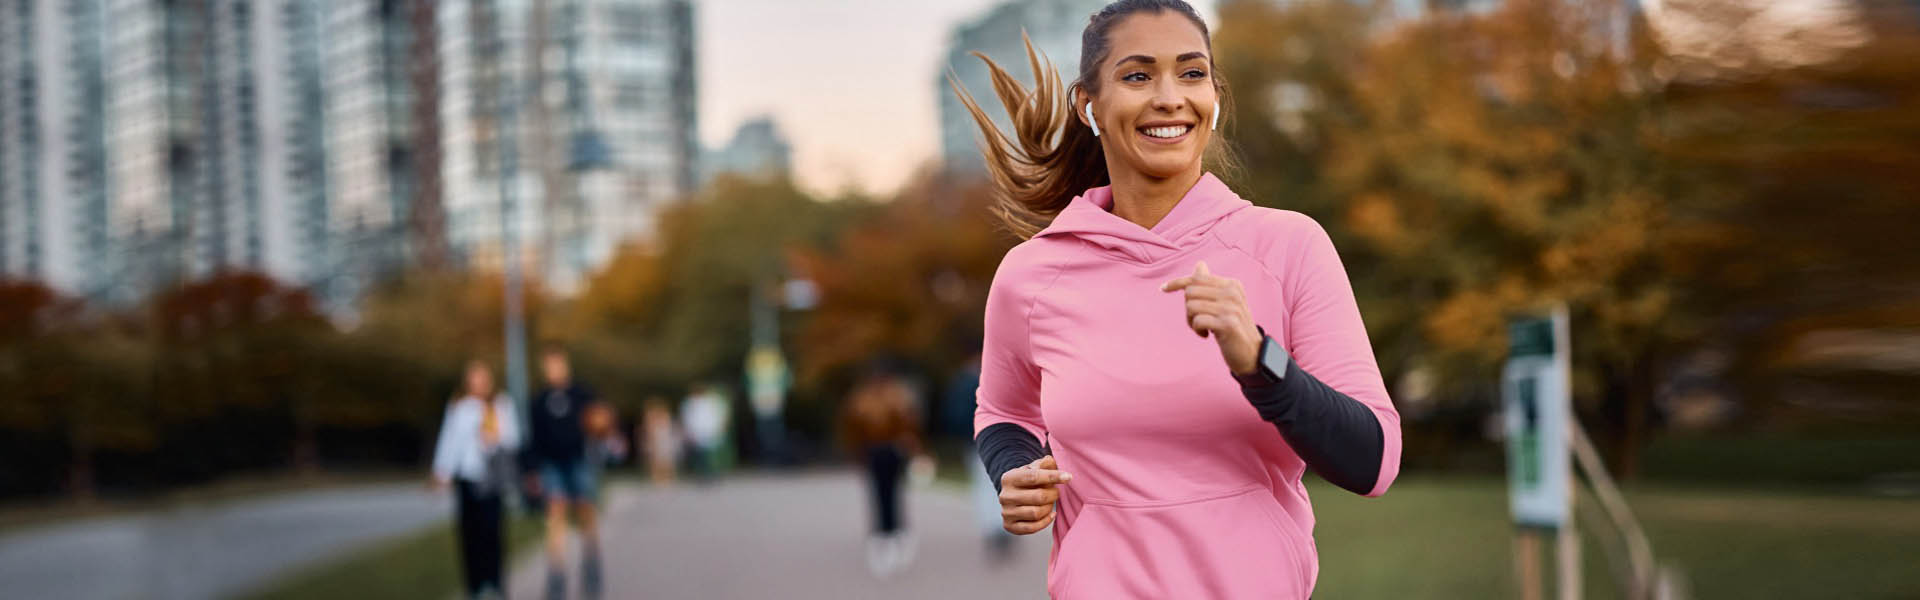 Woman smiling while jogging on outdoor path at dusk.